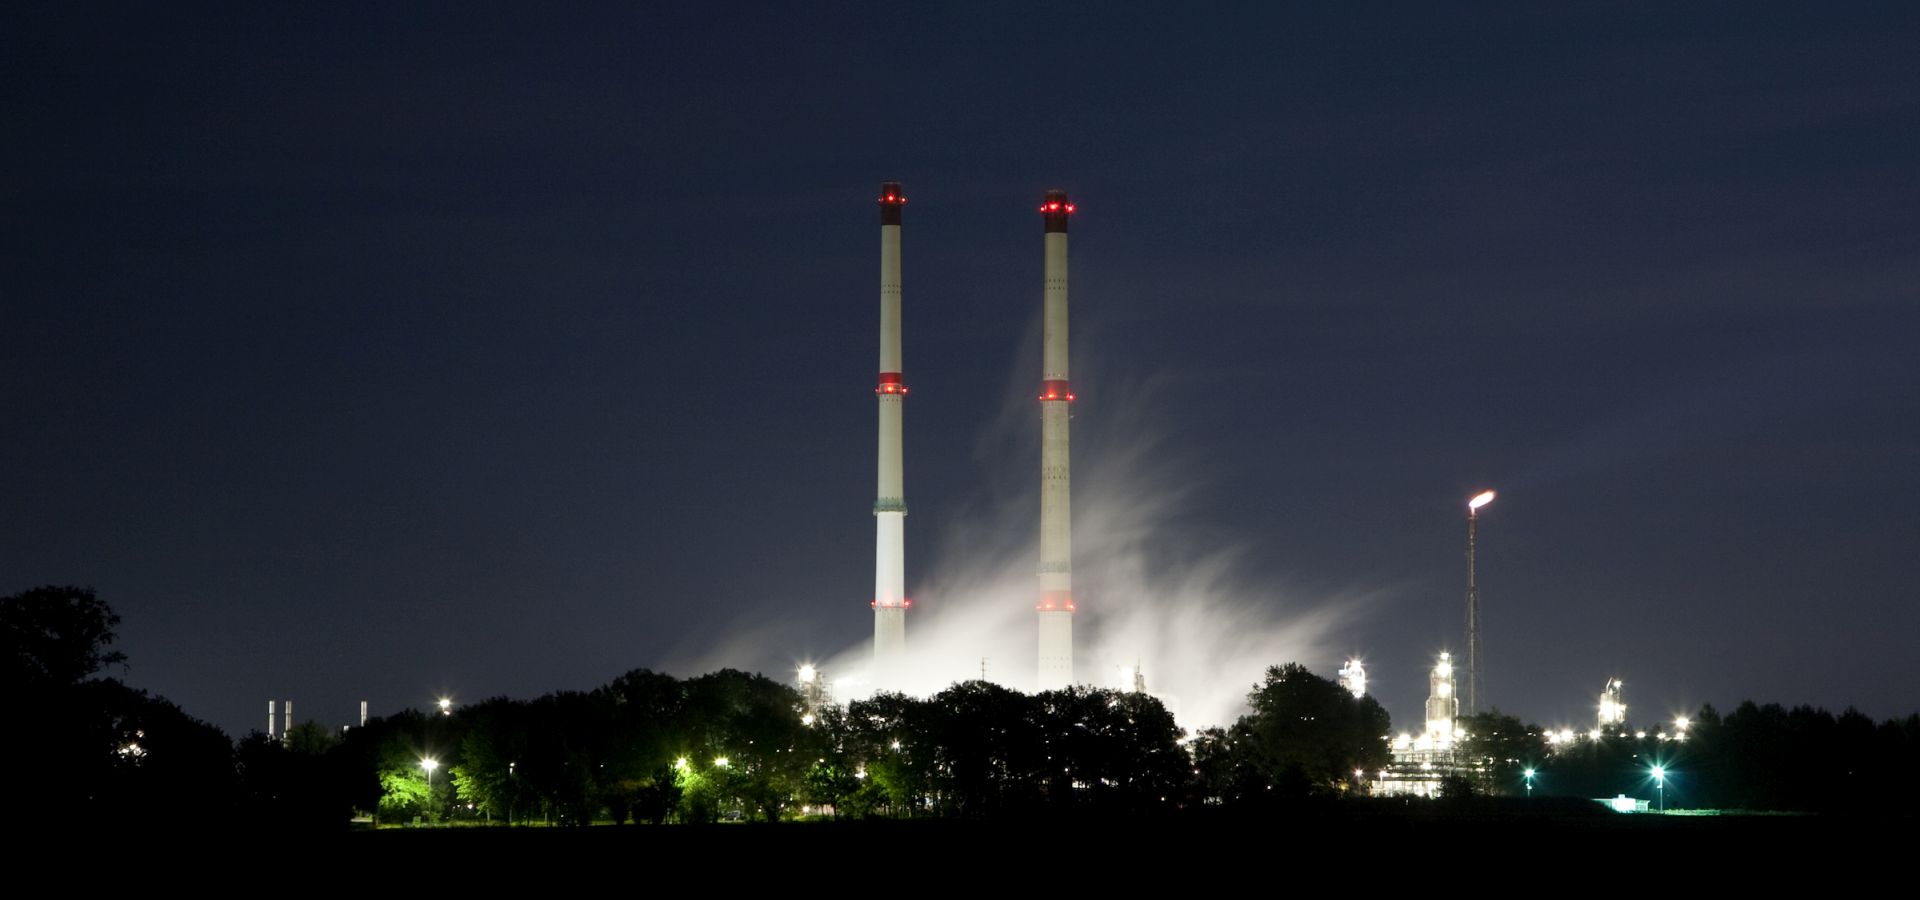 natural gas cleaning plant towers glowing at night